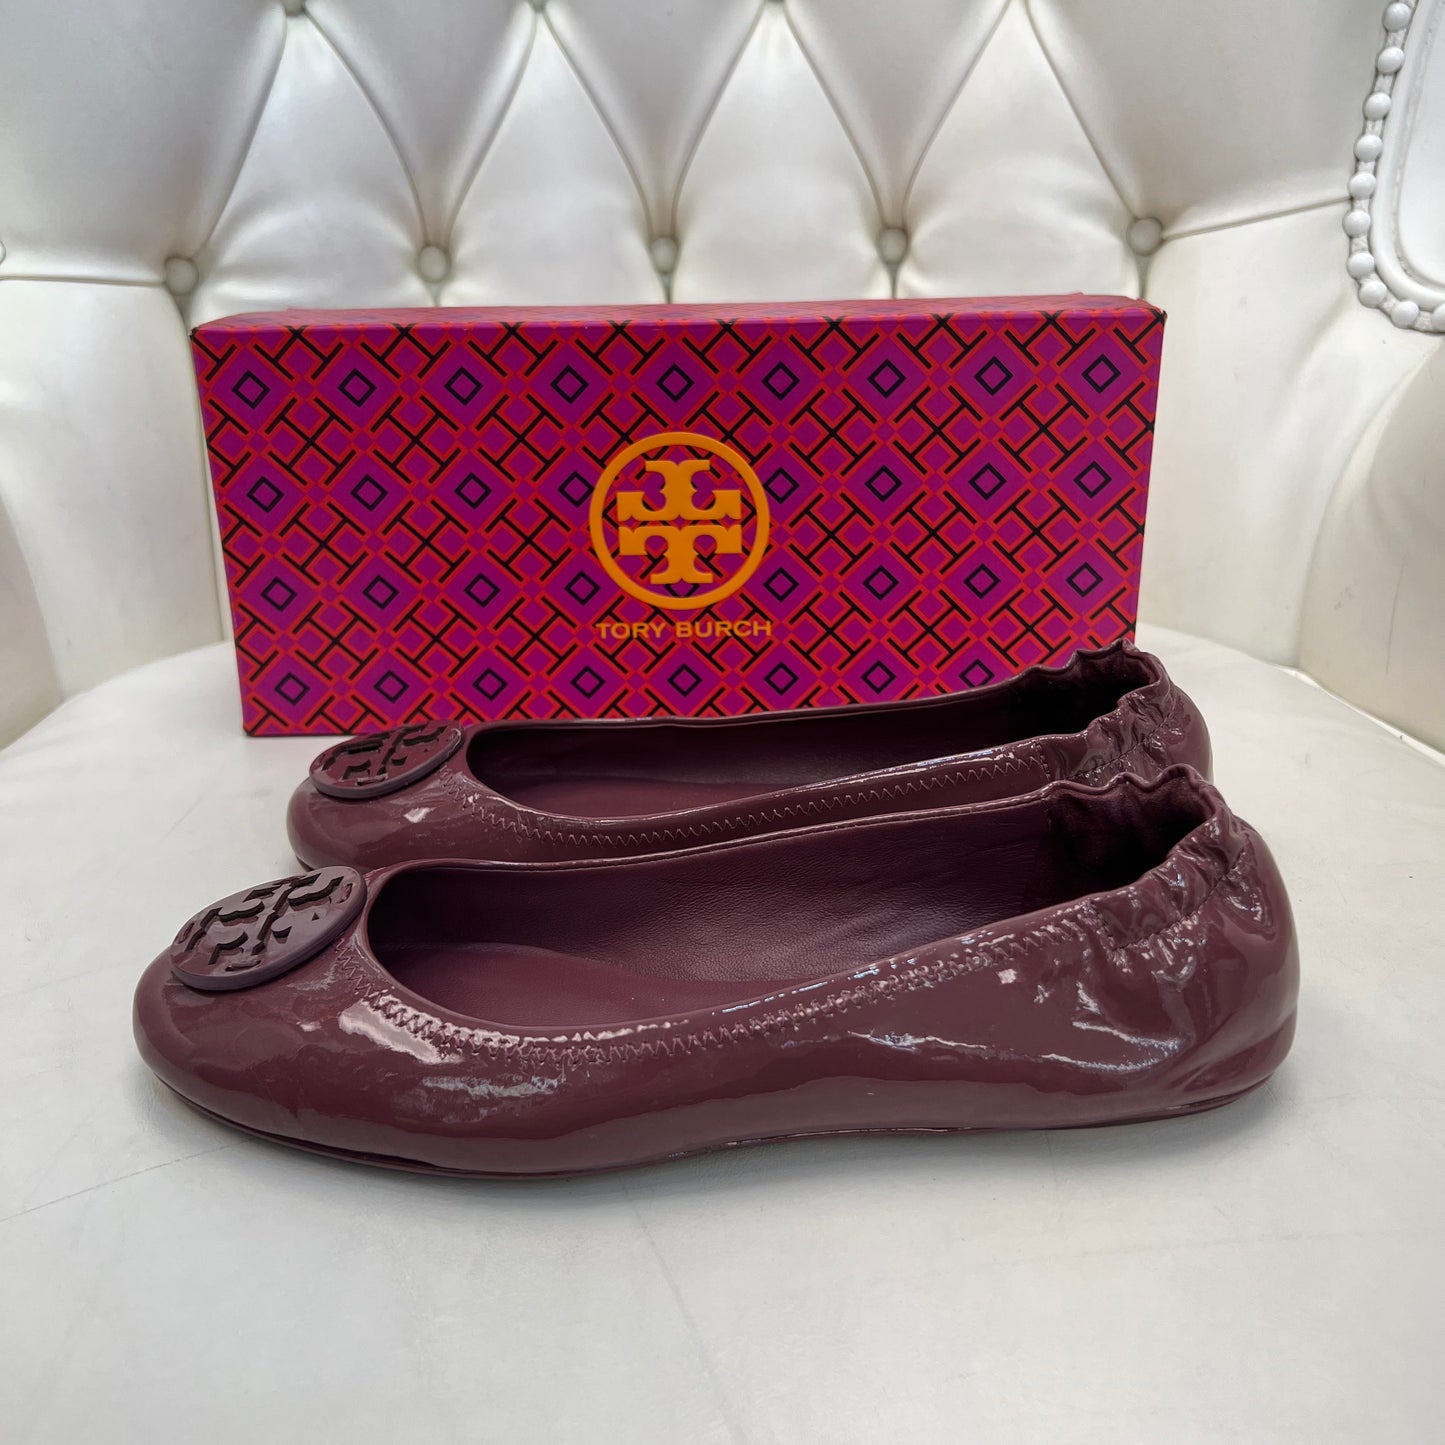 Tory Burch Patent Leather Flats, Size 8.5